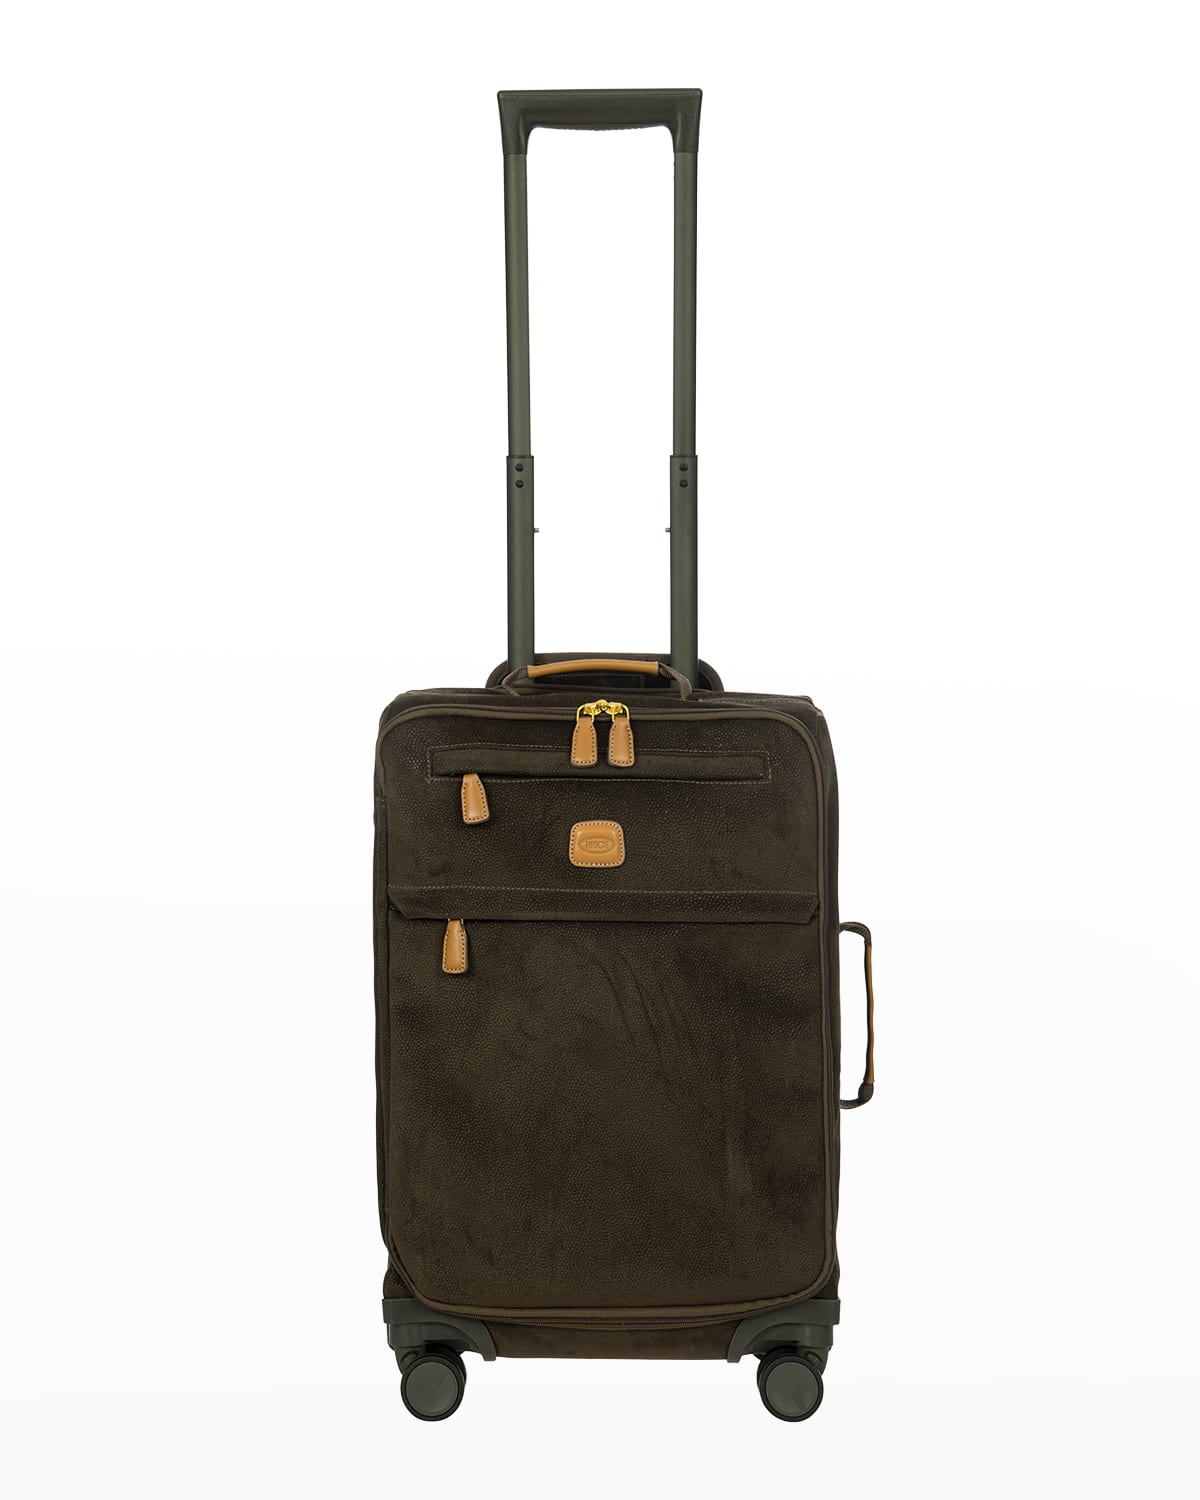 Life Tropea 21" Carry-On Spinner Luggage